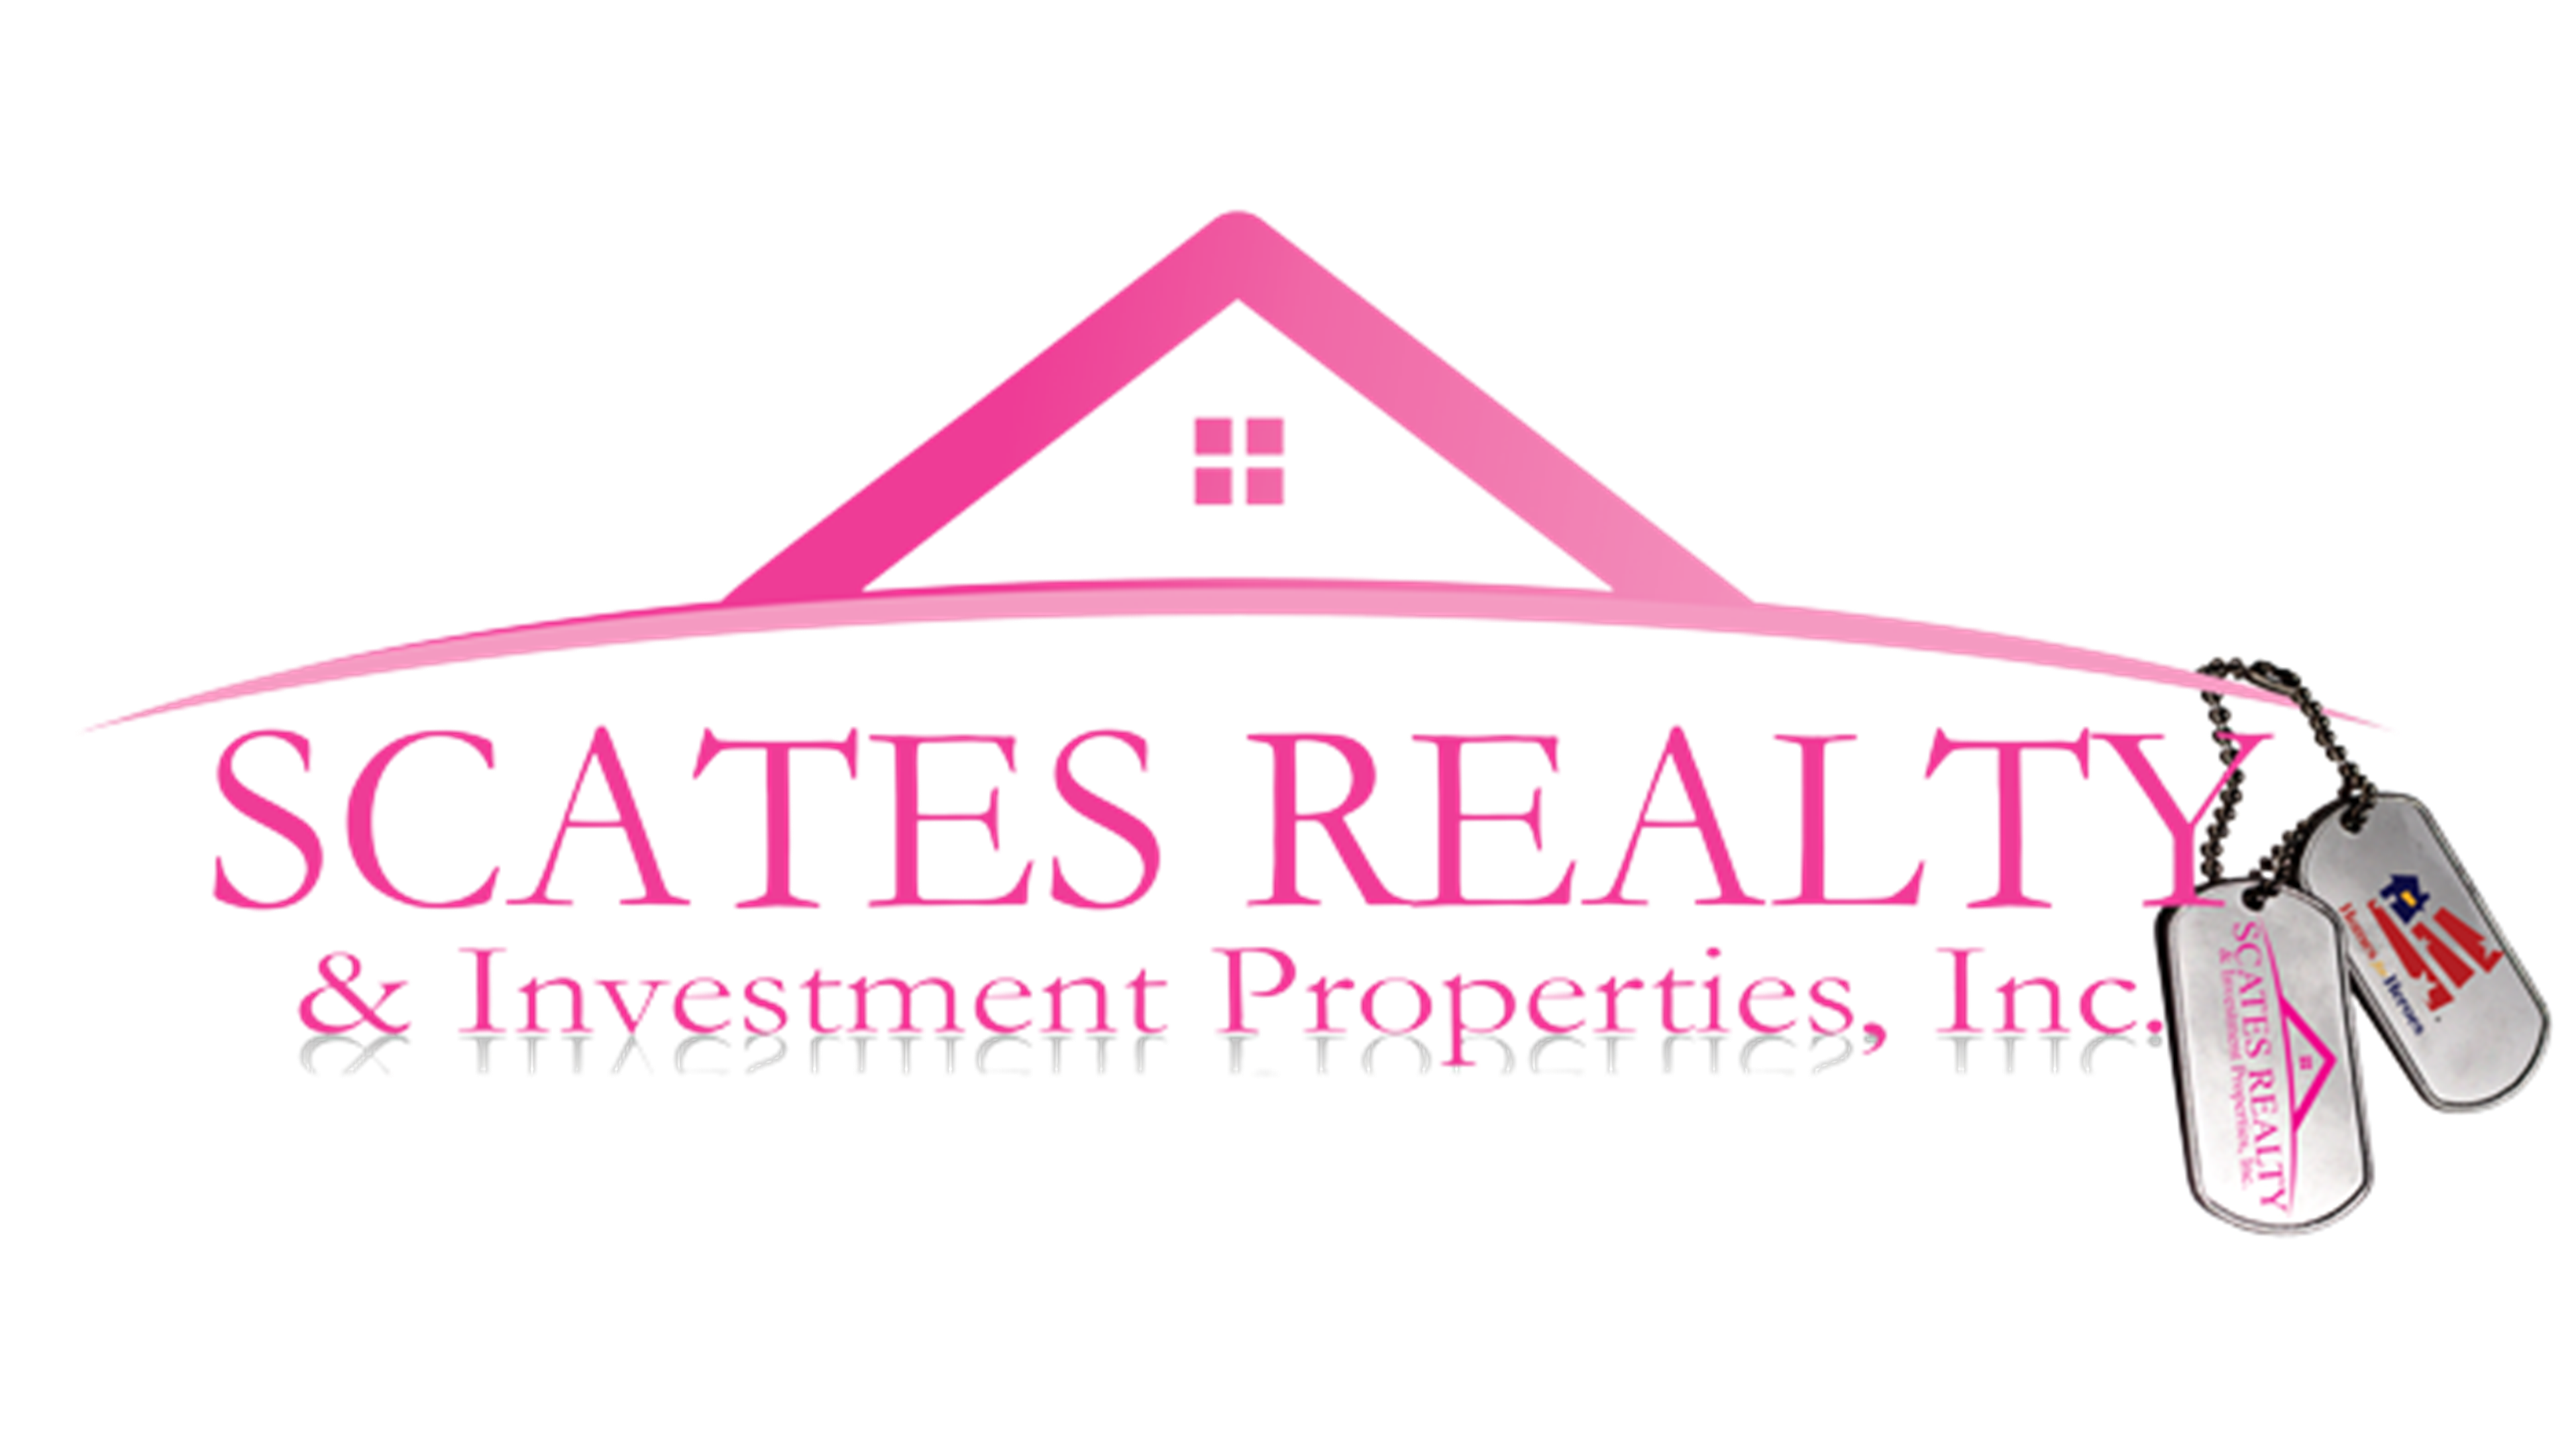 Eileen Scates - Scates Realty & Investment Properties INC Logo